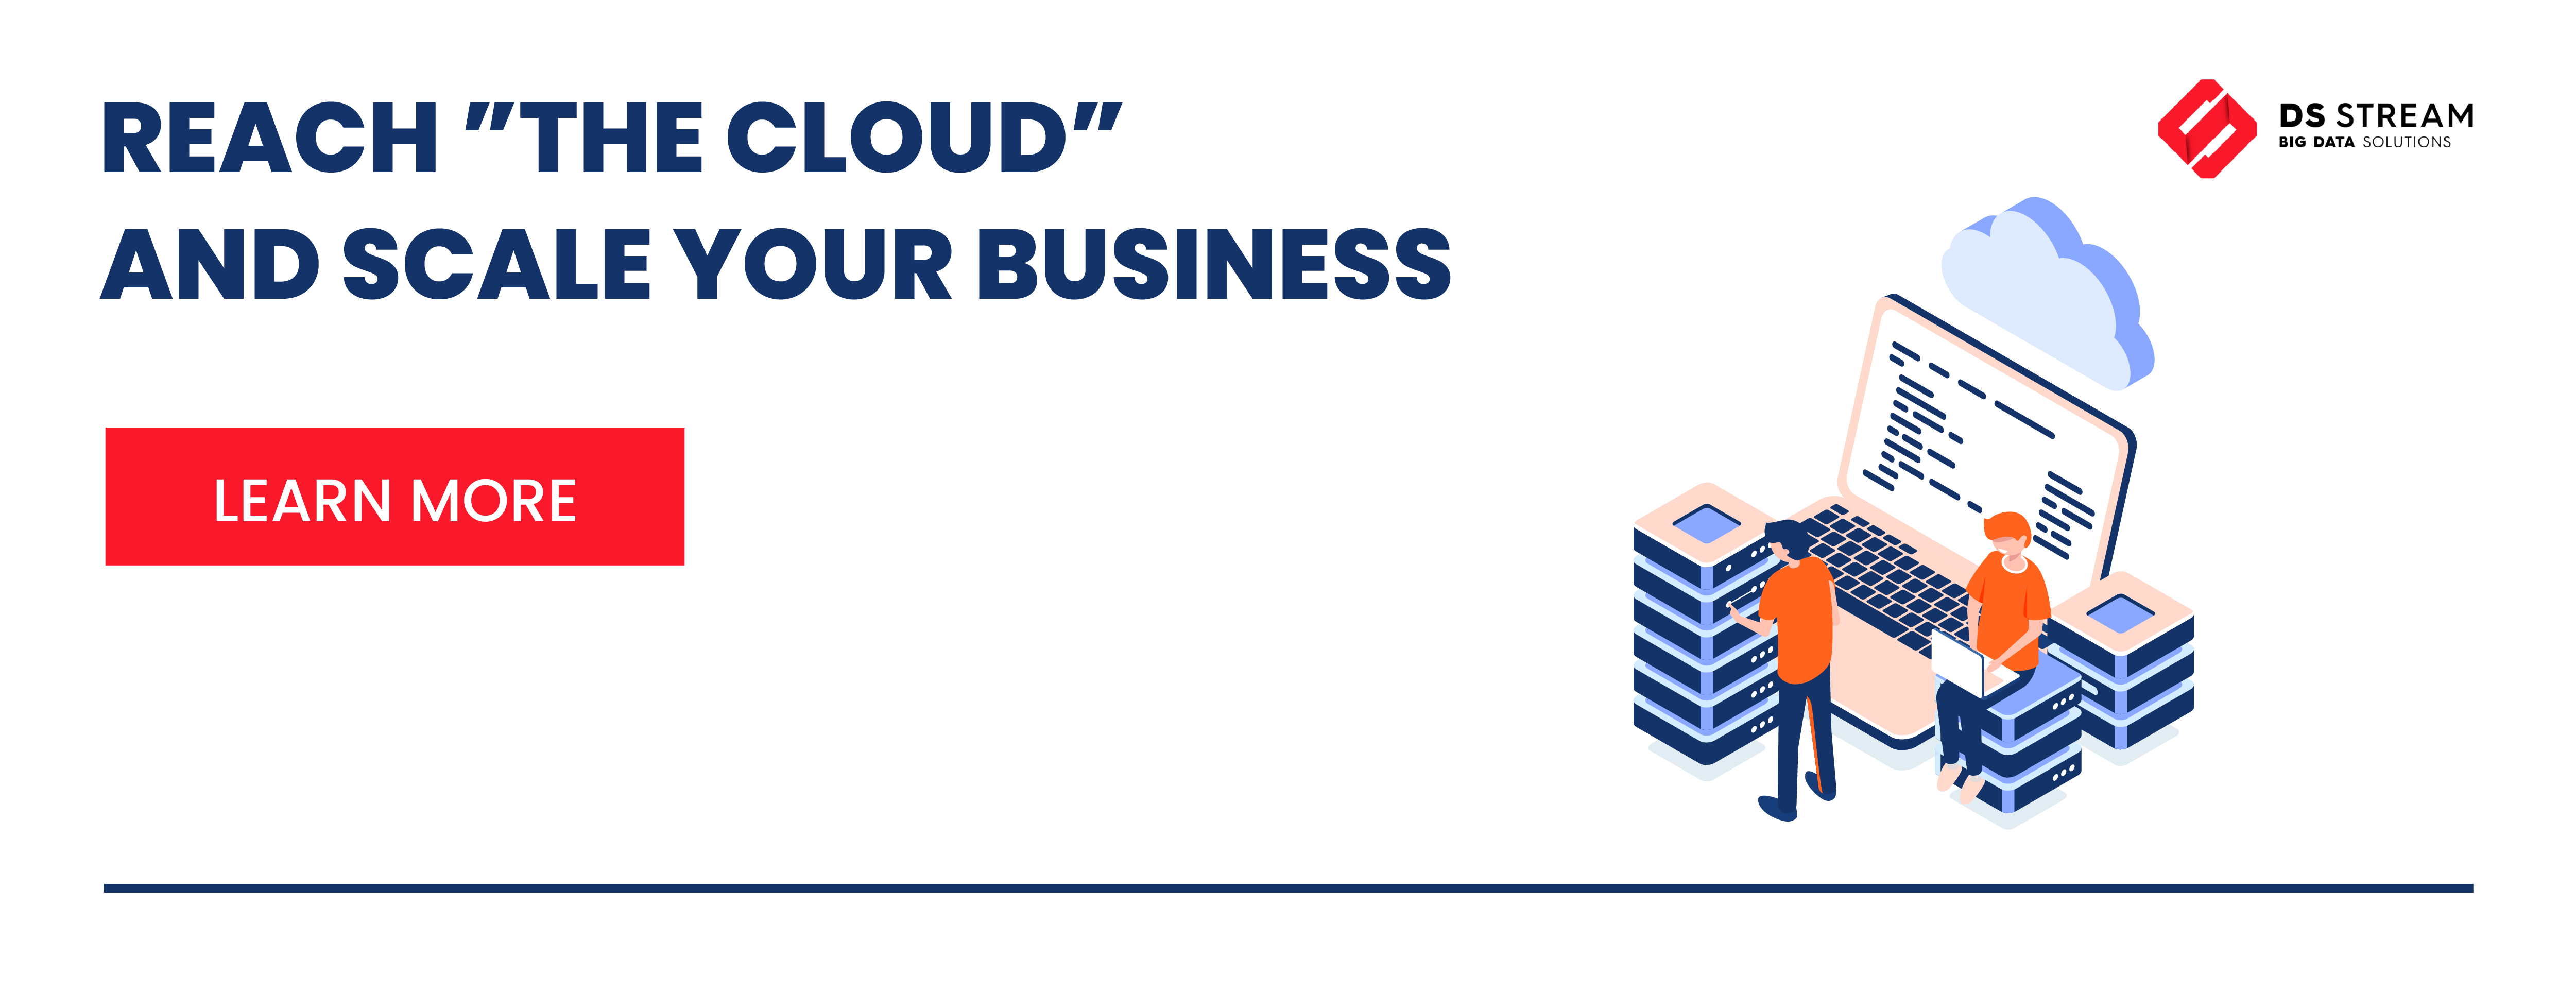 Cloud Solutions Banner